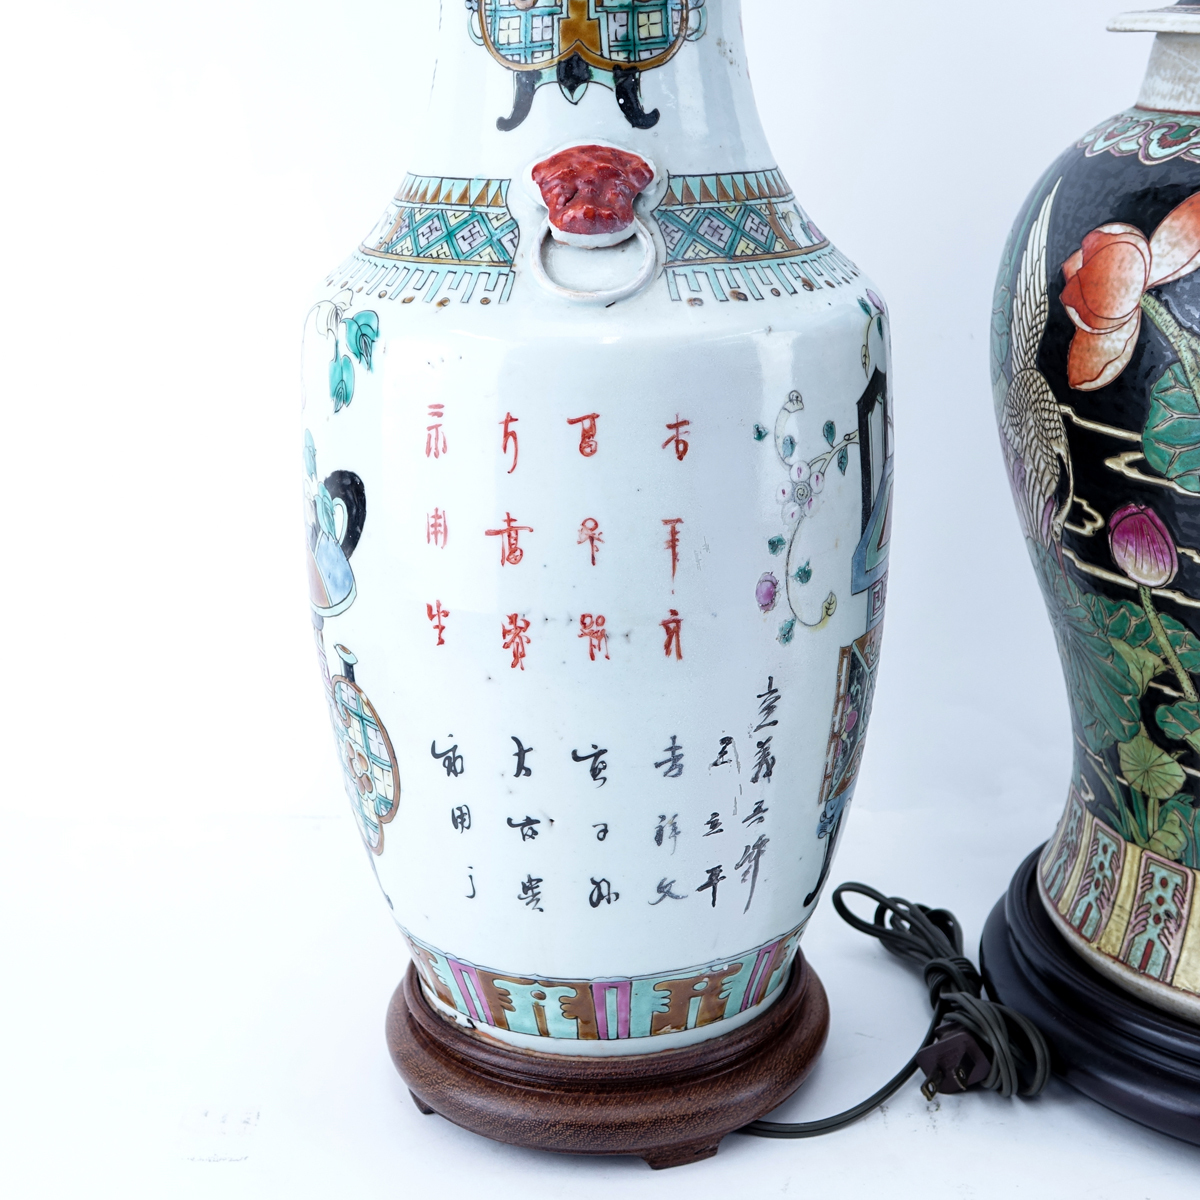 Grouping of Two (2): Chinese Famille Rose Vases Mounted as Lamps, Chinese Famille Noir Ginger Jar Mounted as Lamp. Both are in good condition.